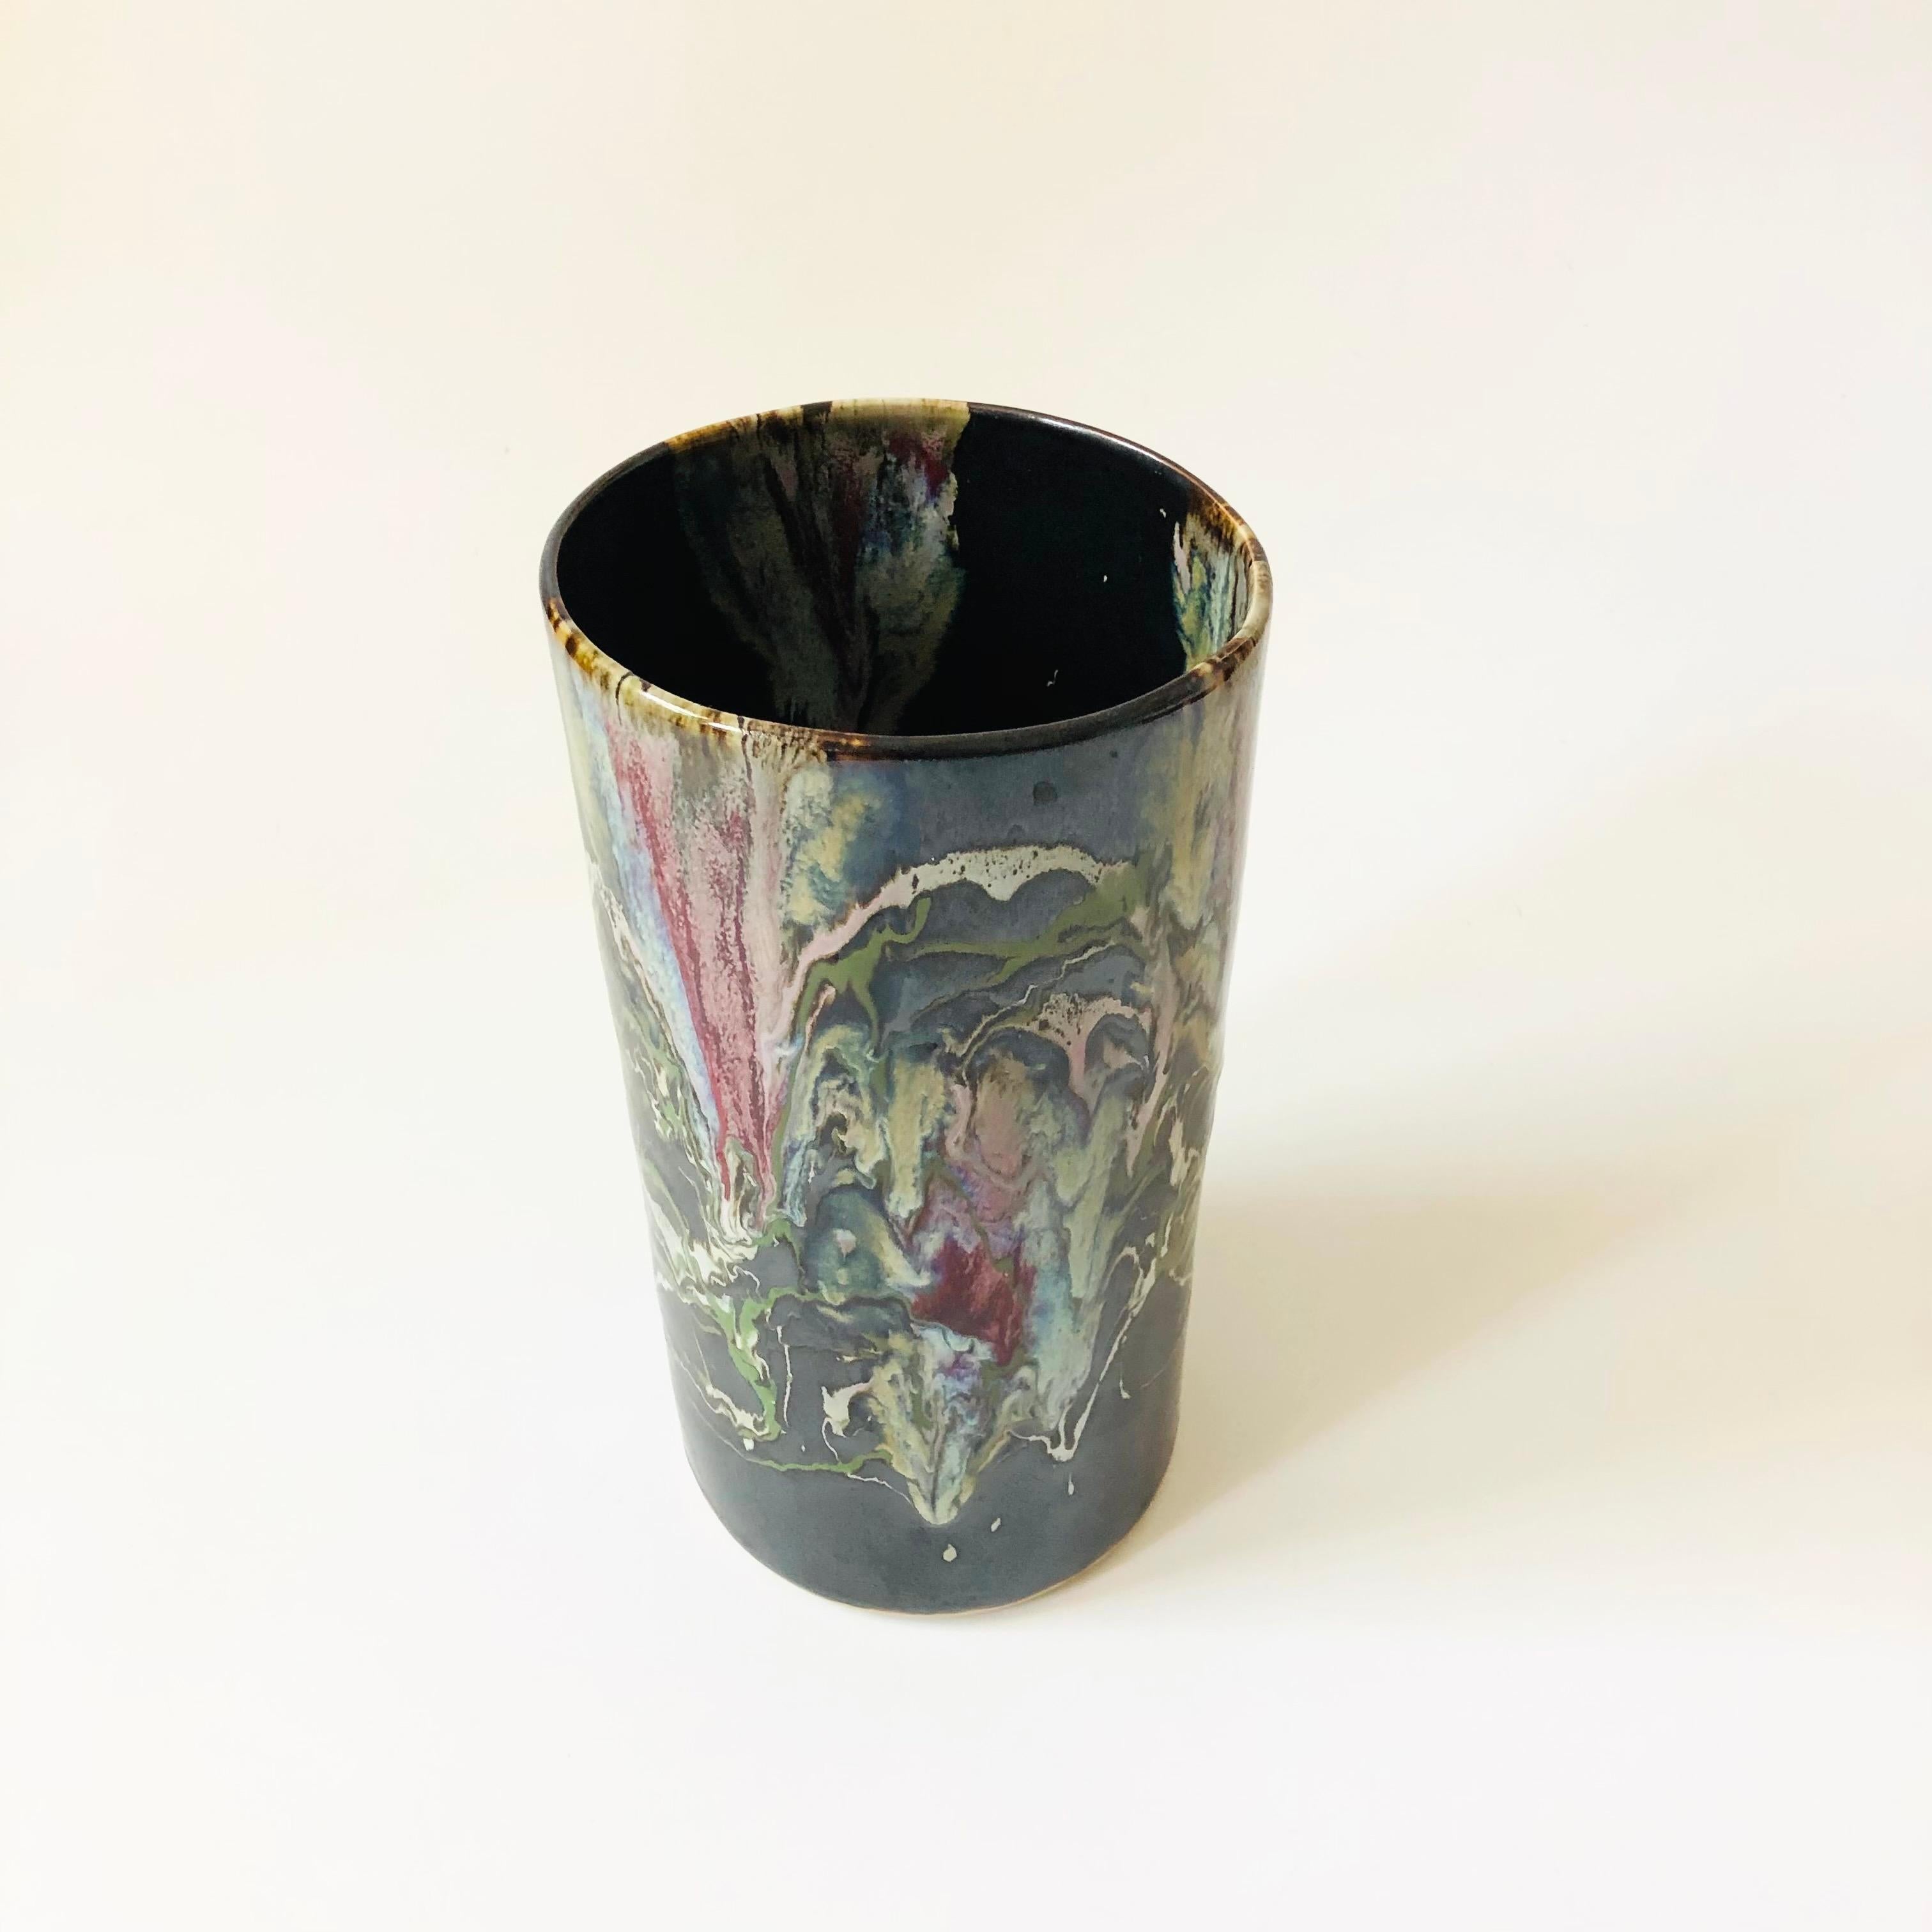 A large vintage pottery vase with a drip glaze finish. Dark base glaze color and colorful irregular drip pattern decorating the surface. Versatile cylinder shape and a slightly irregular form the hand made process.

